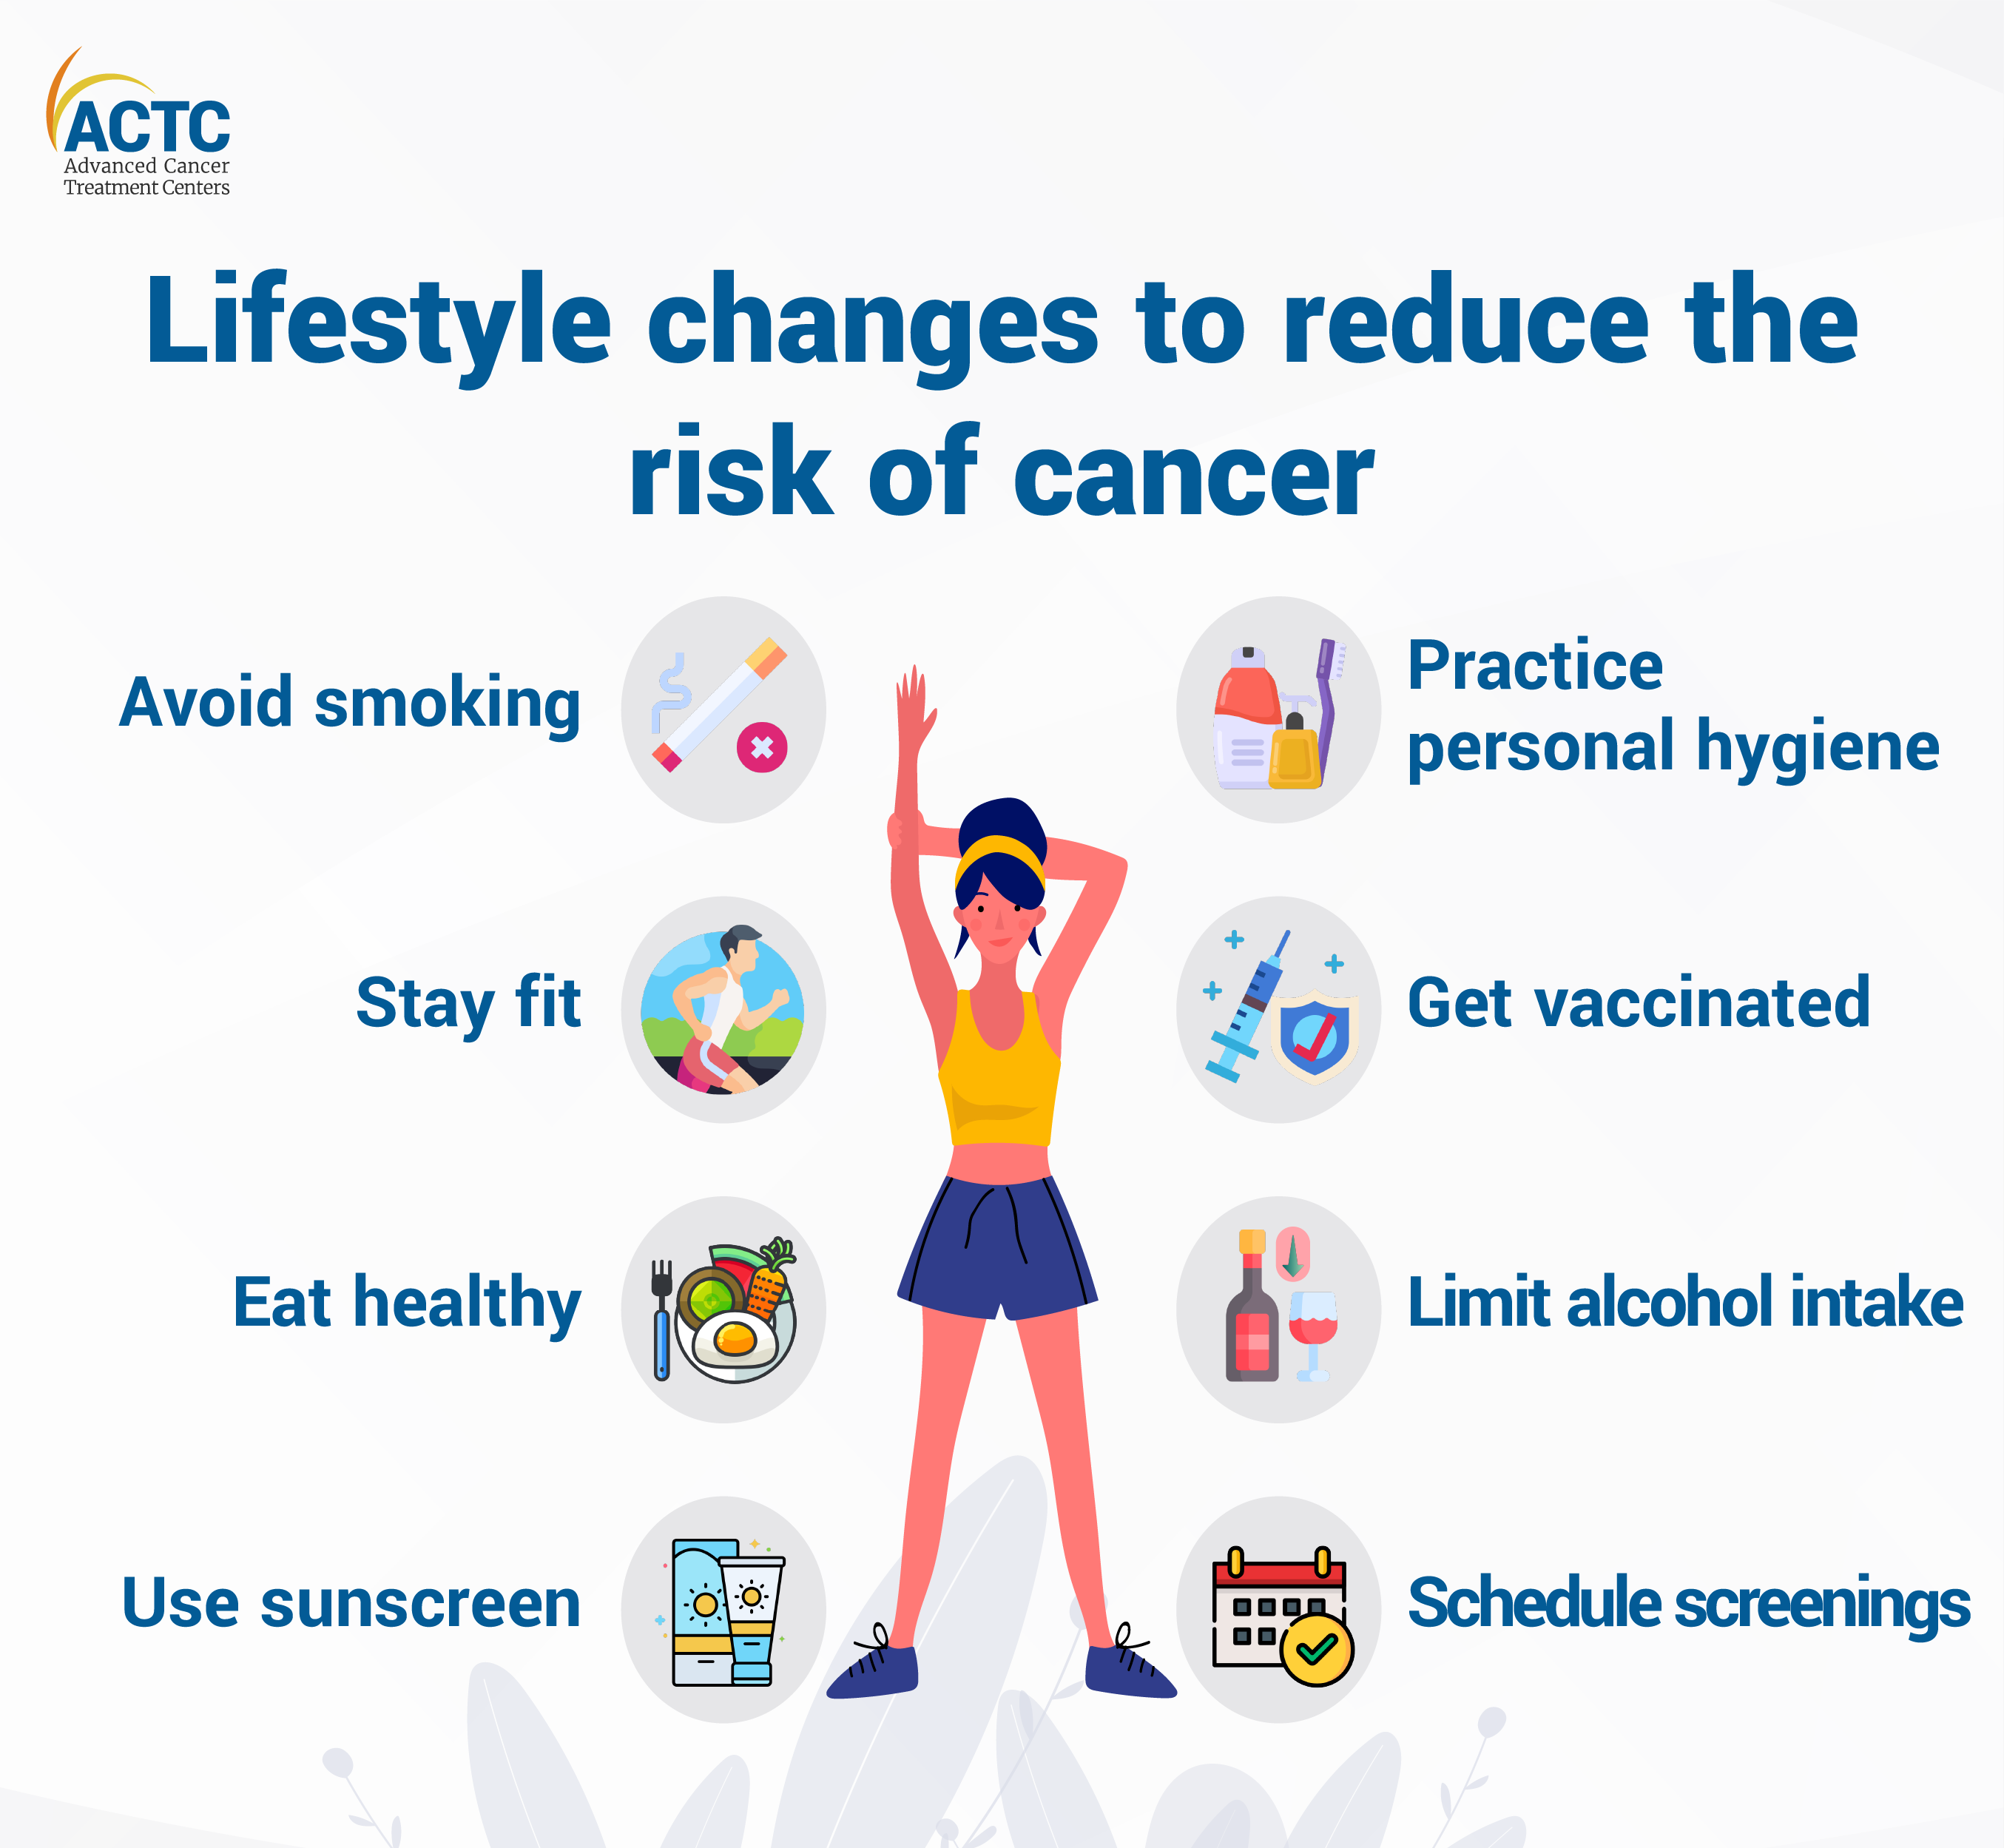 8 tips to reduce the risk of cancer